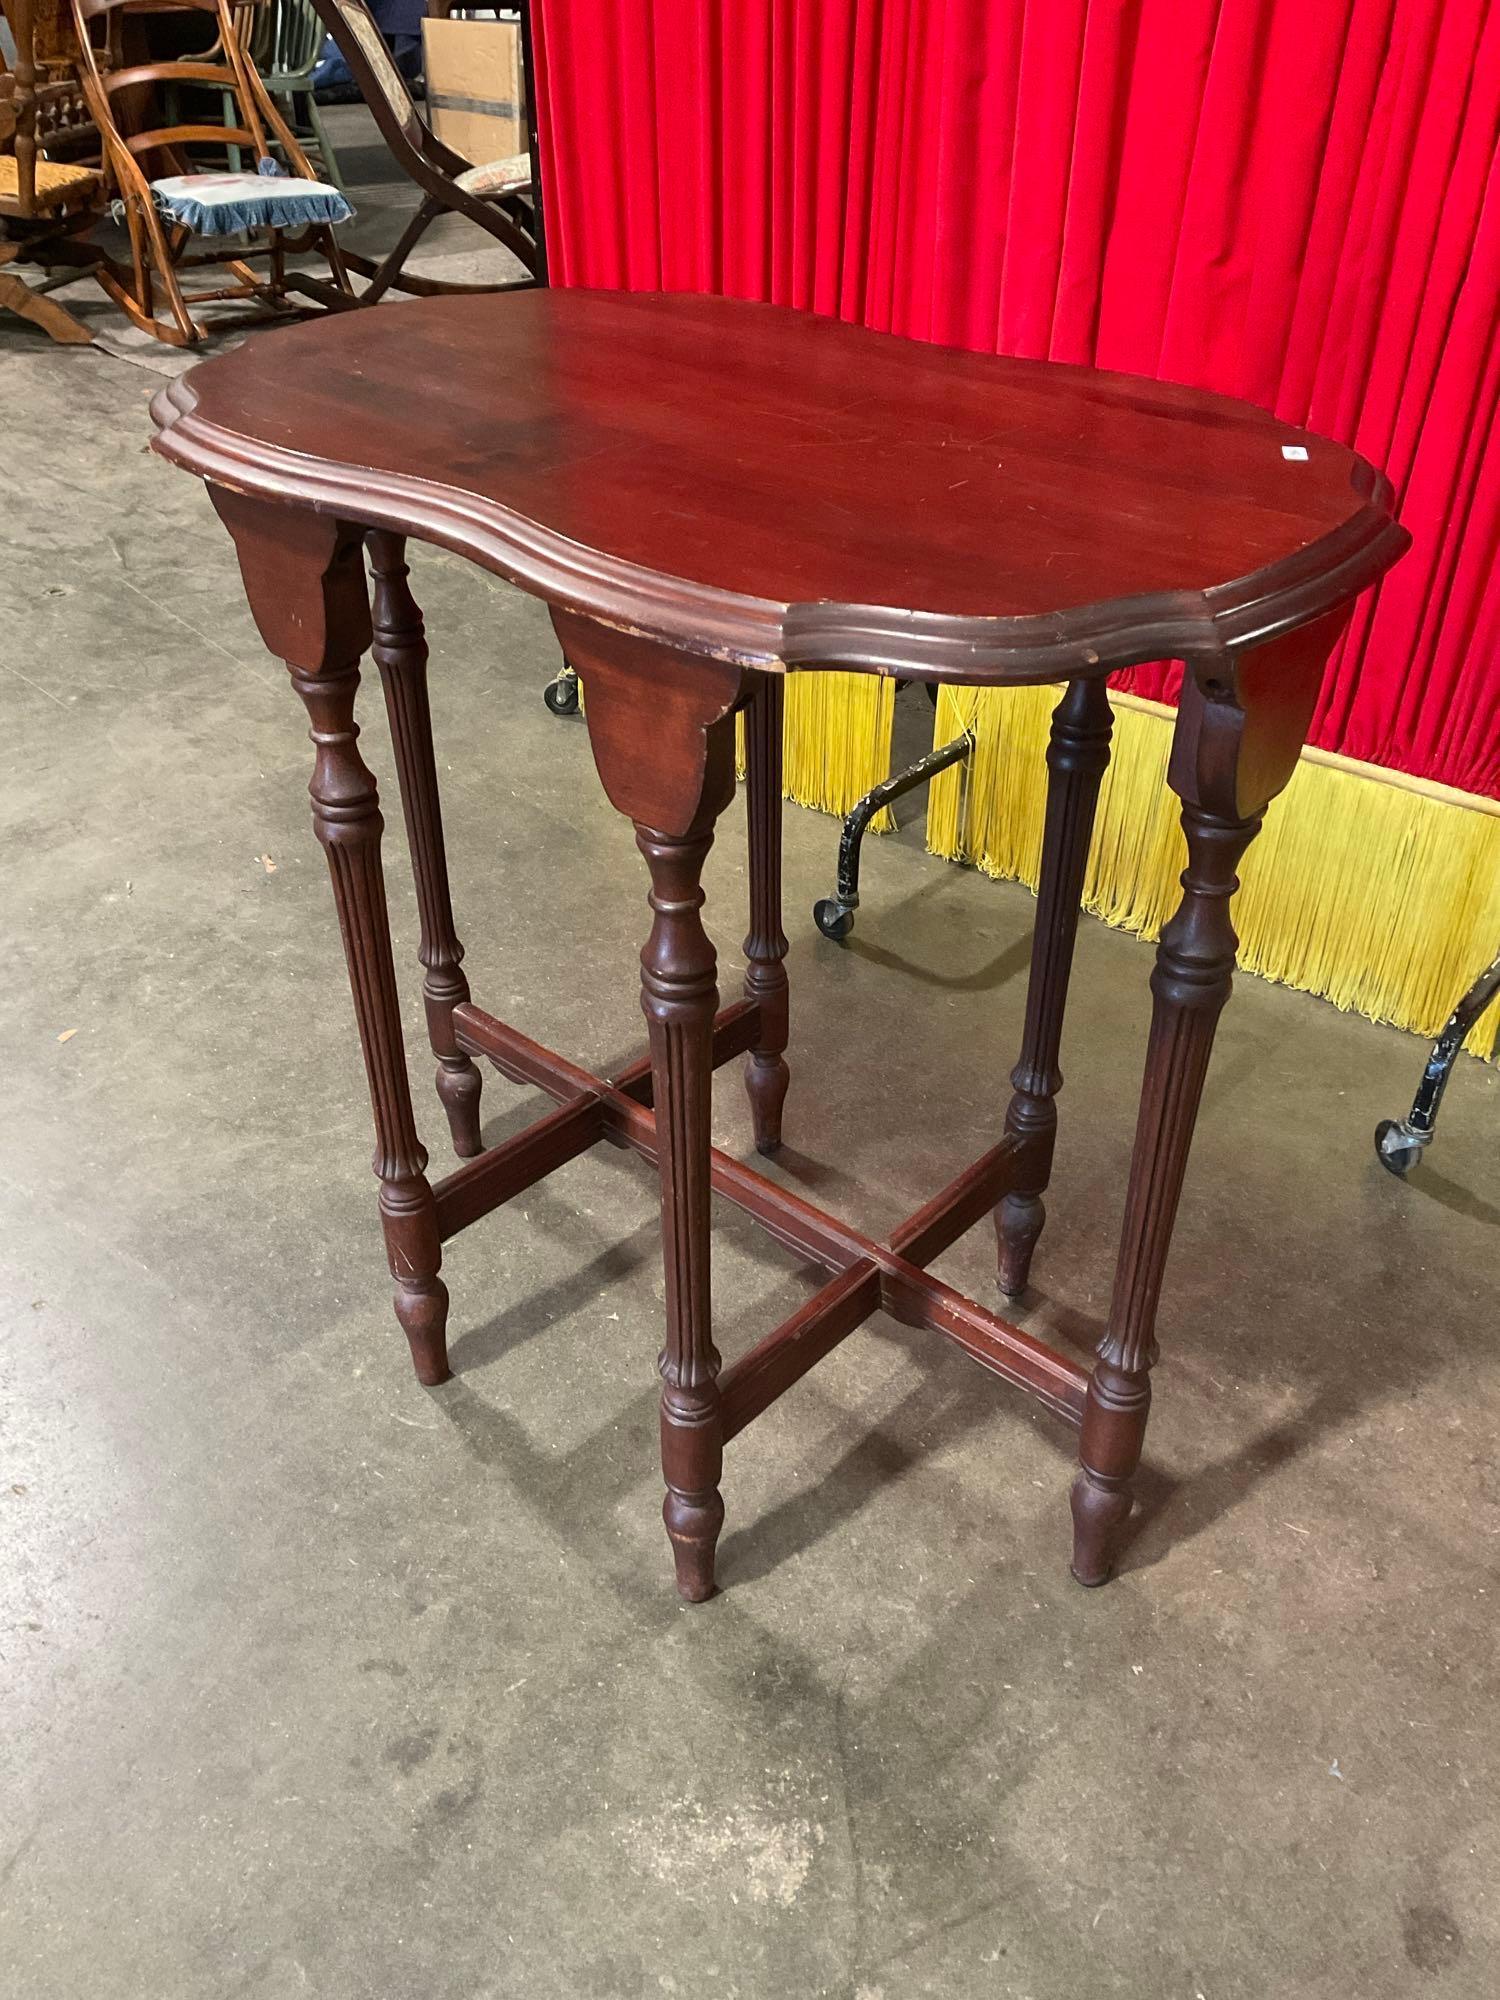 Antique Wooden Side Hall Table w/ Scalloped Edges, Unique Shield Shape & Fluted Legs. See pics.